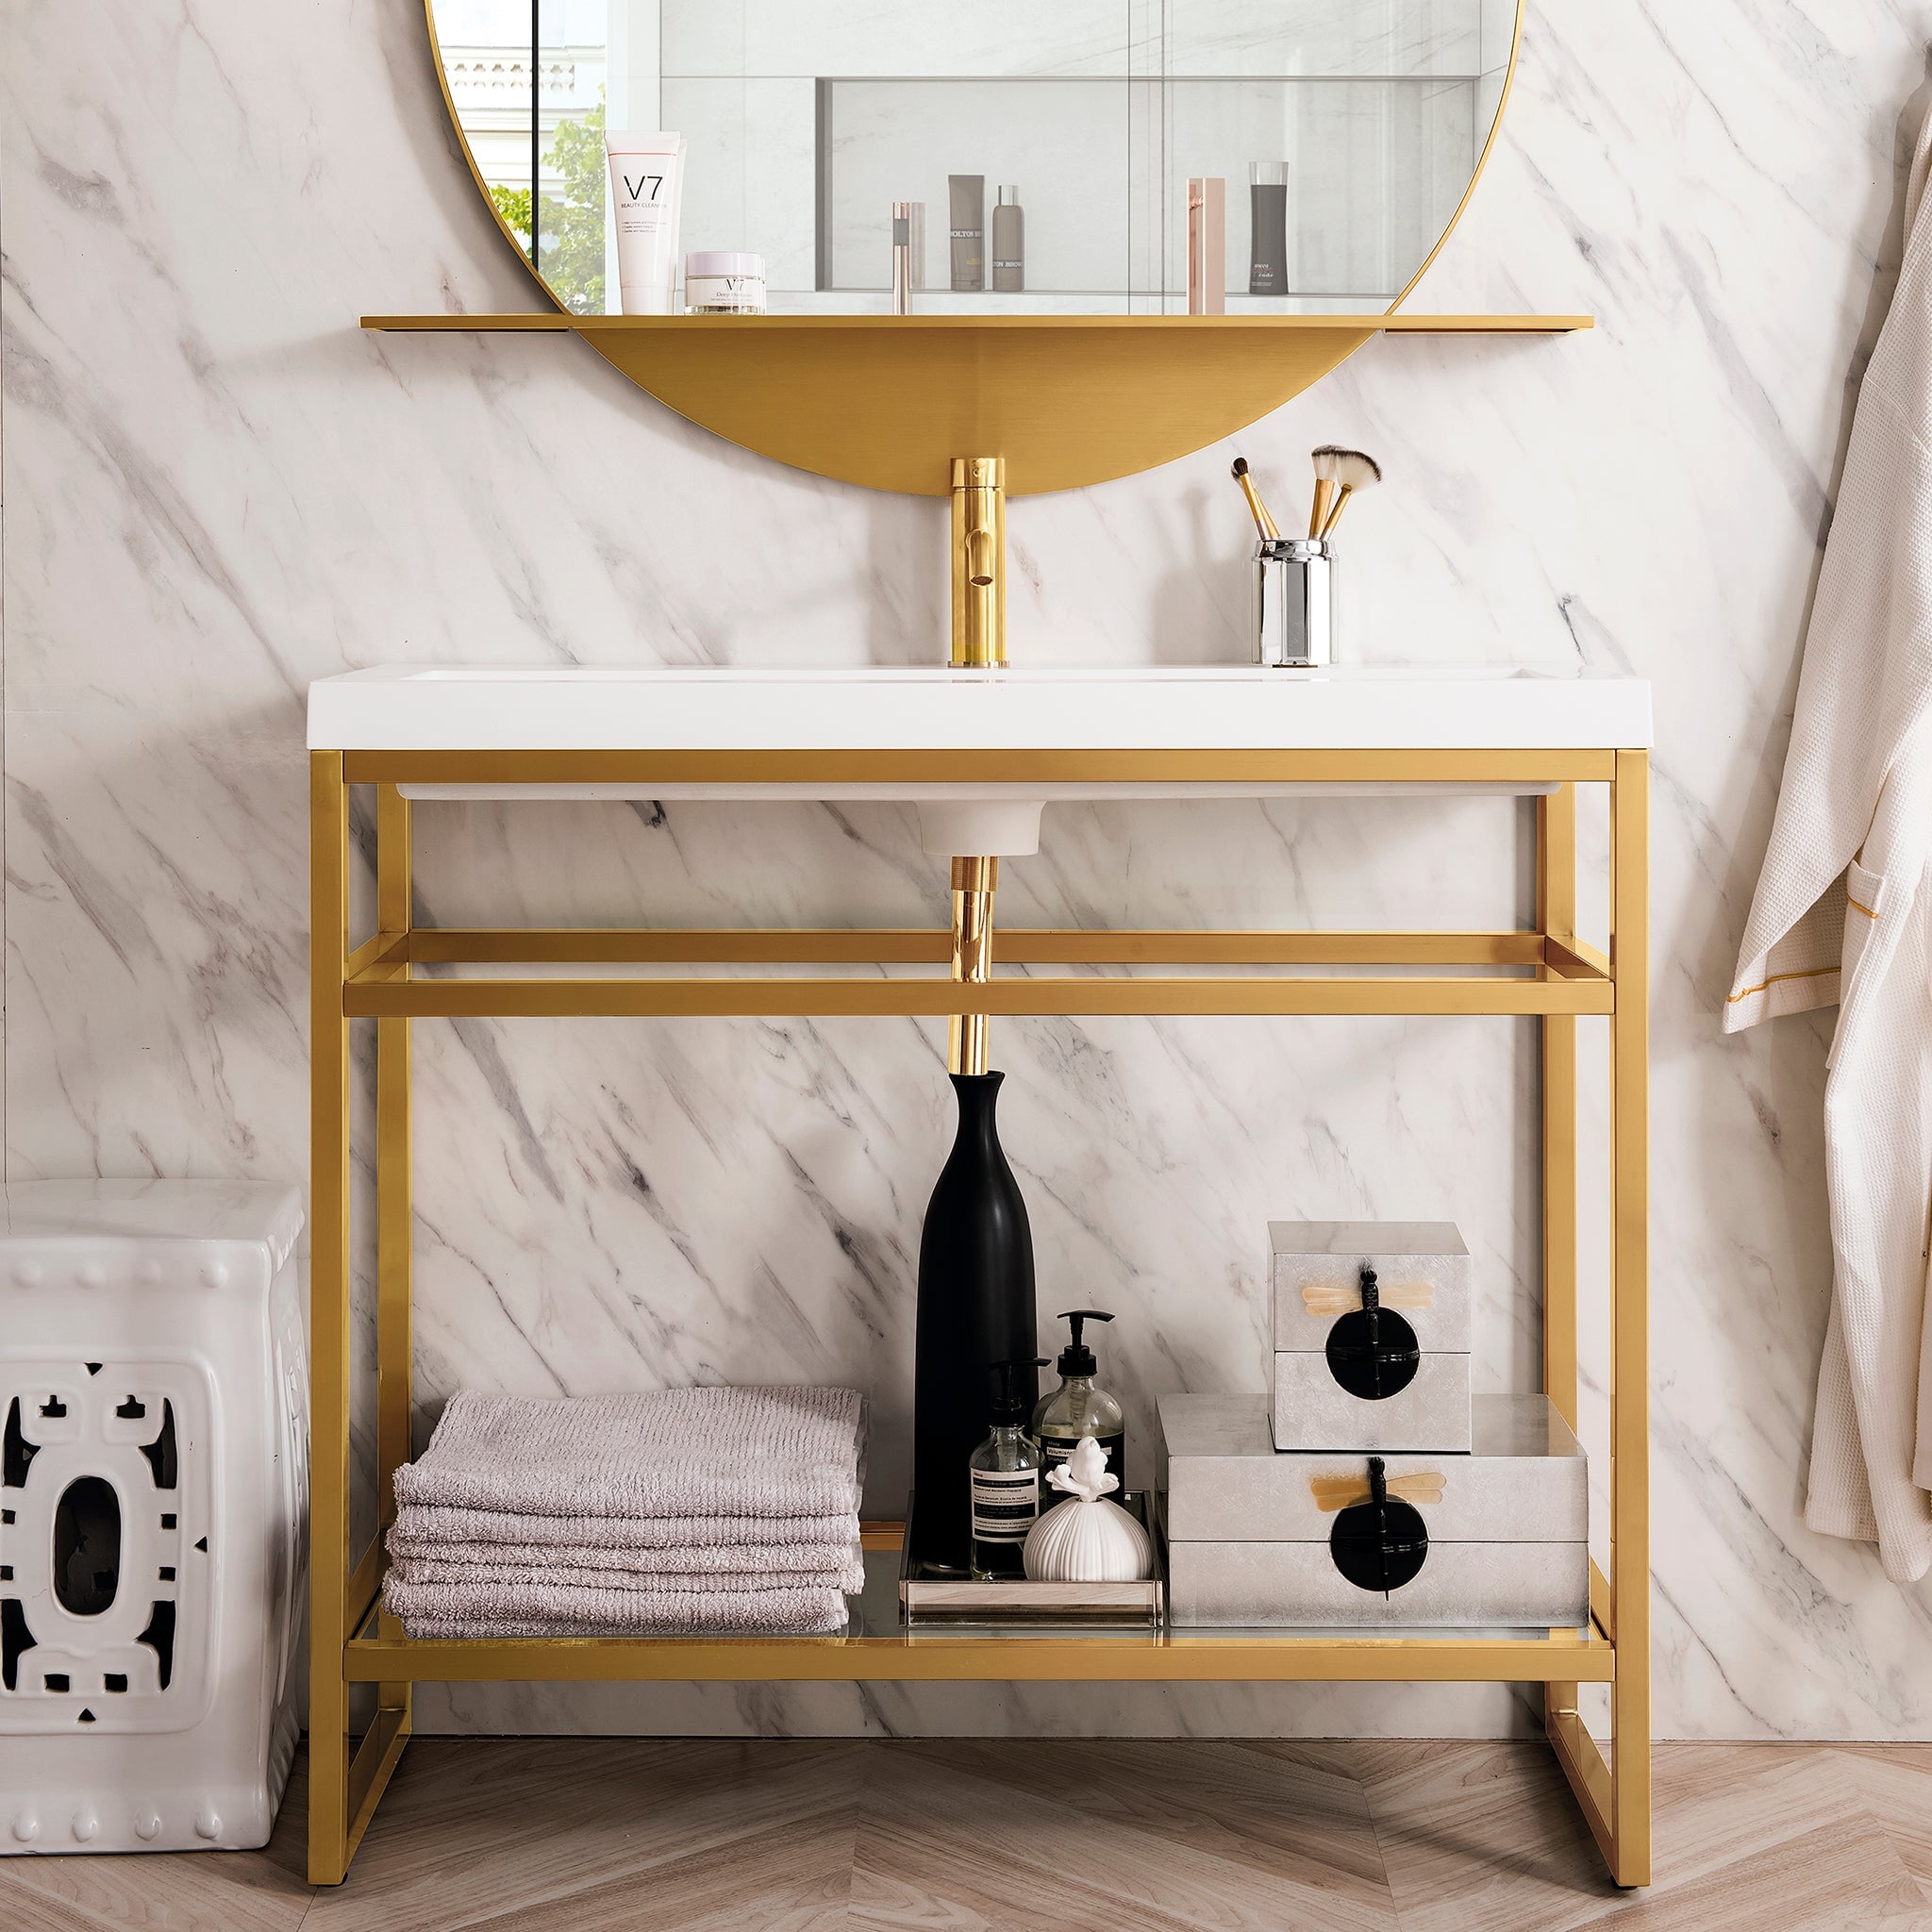 James Martin Vanities Boston Radiant Gold Stainless Steel Freestanding  Transitional Console Sink with Base (39.4-in x 15.4-in x 35.5-in) at